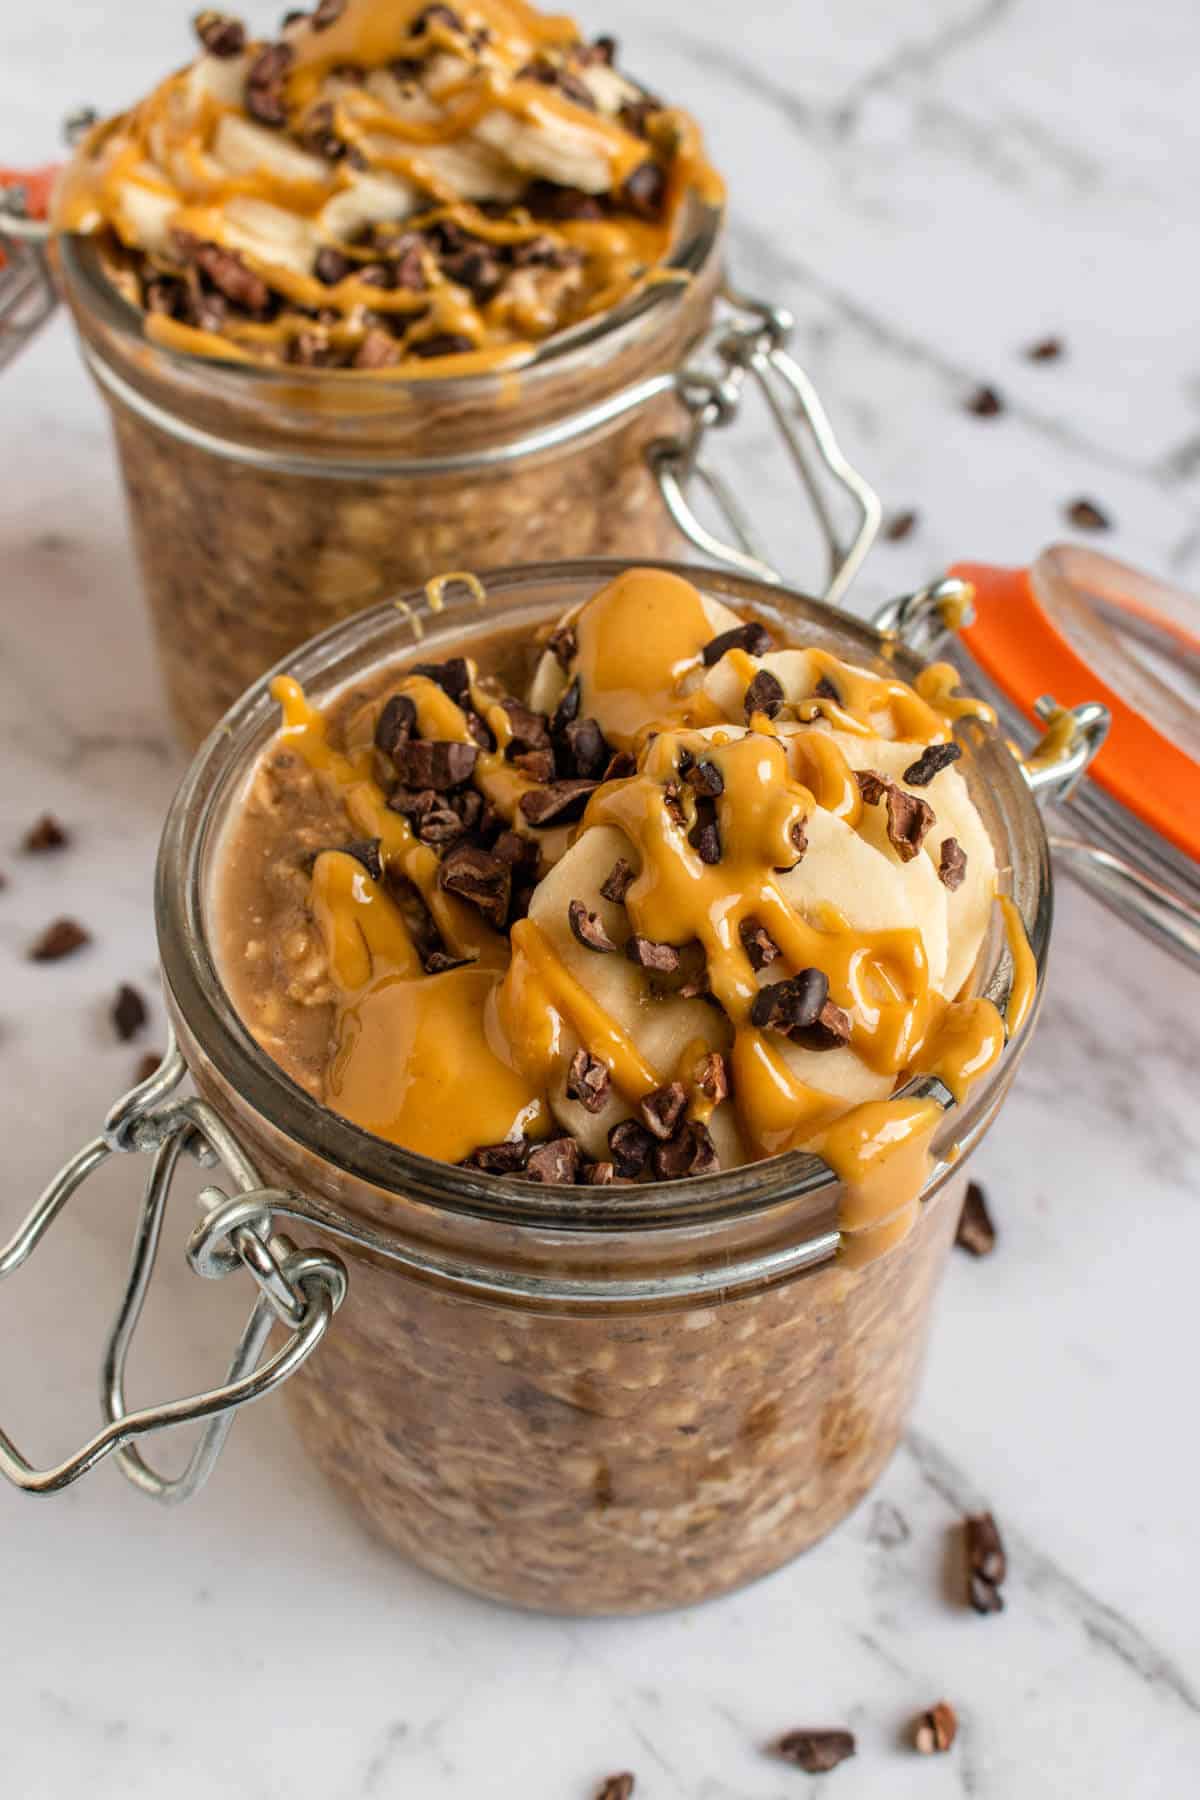 Chocolate Peanut Butter Overnight Oats topped with cacao nibs, banana and peanut butter